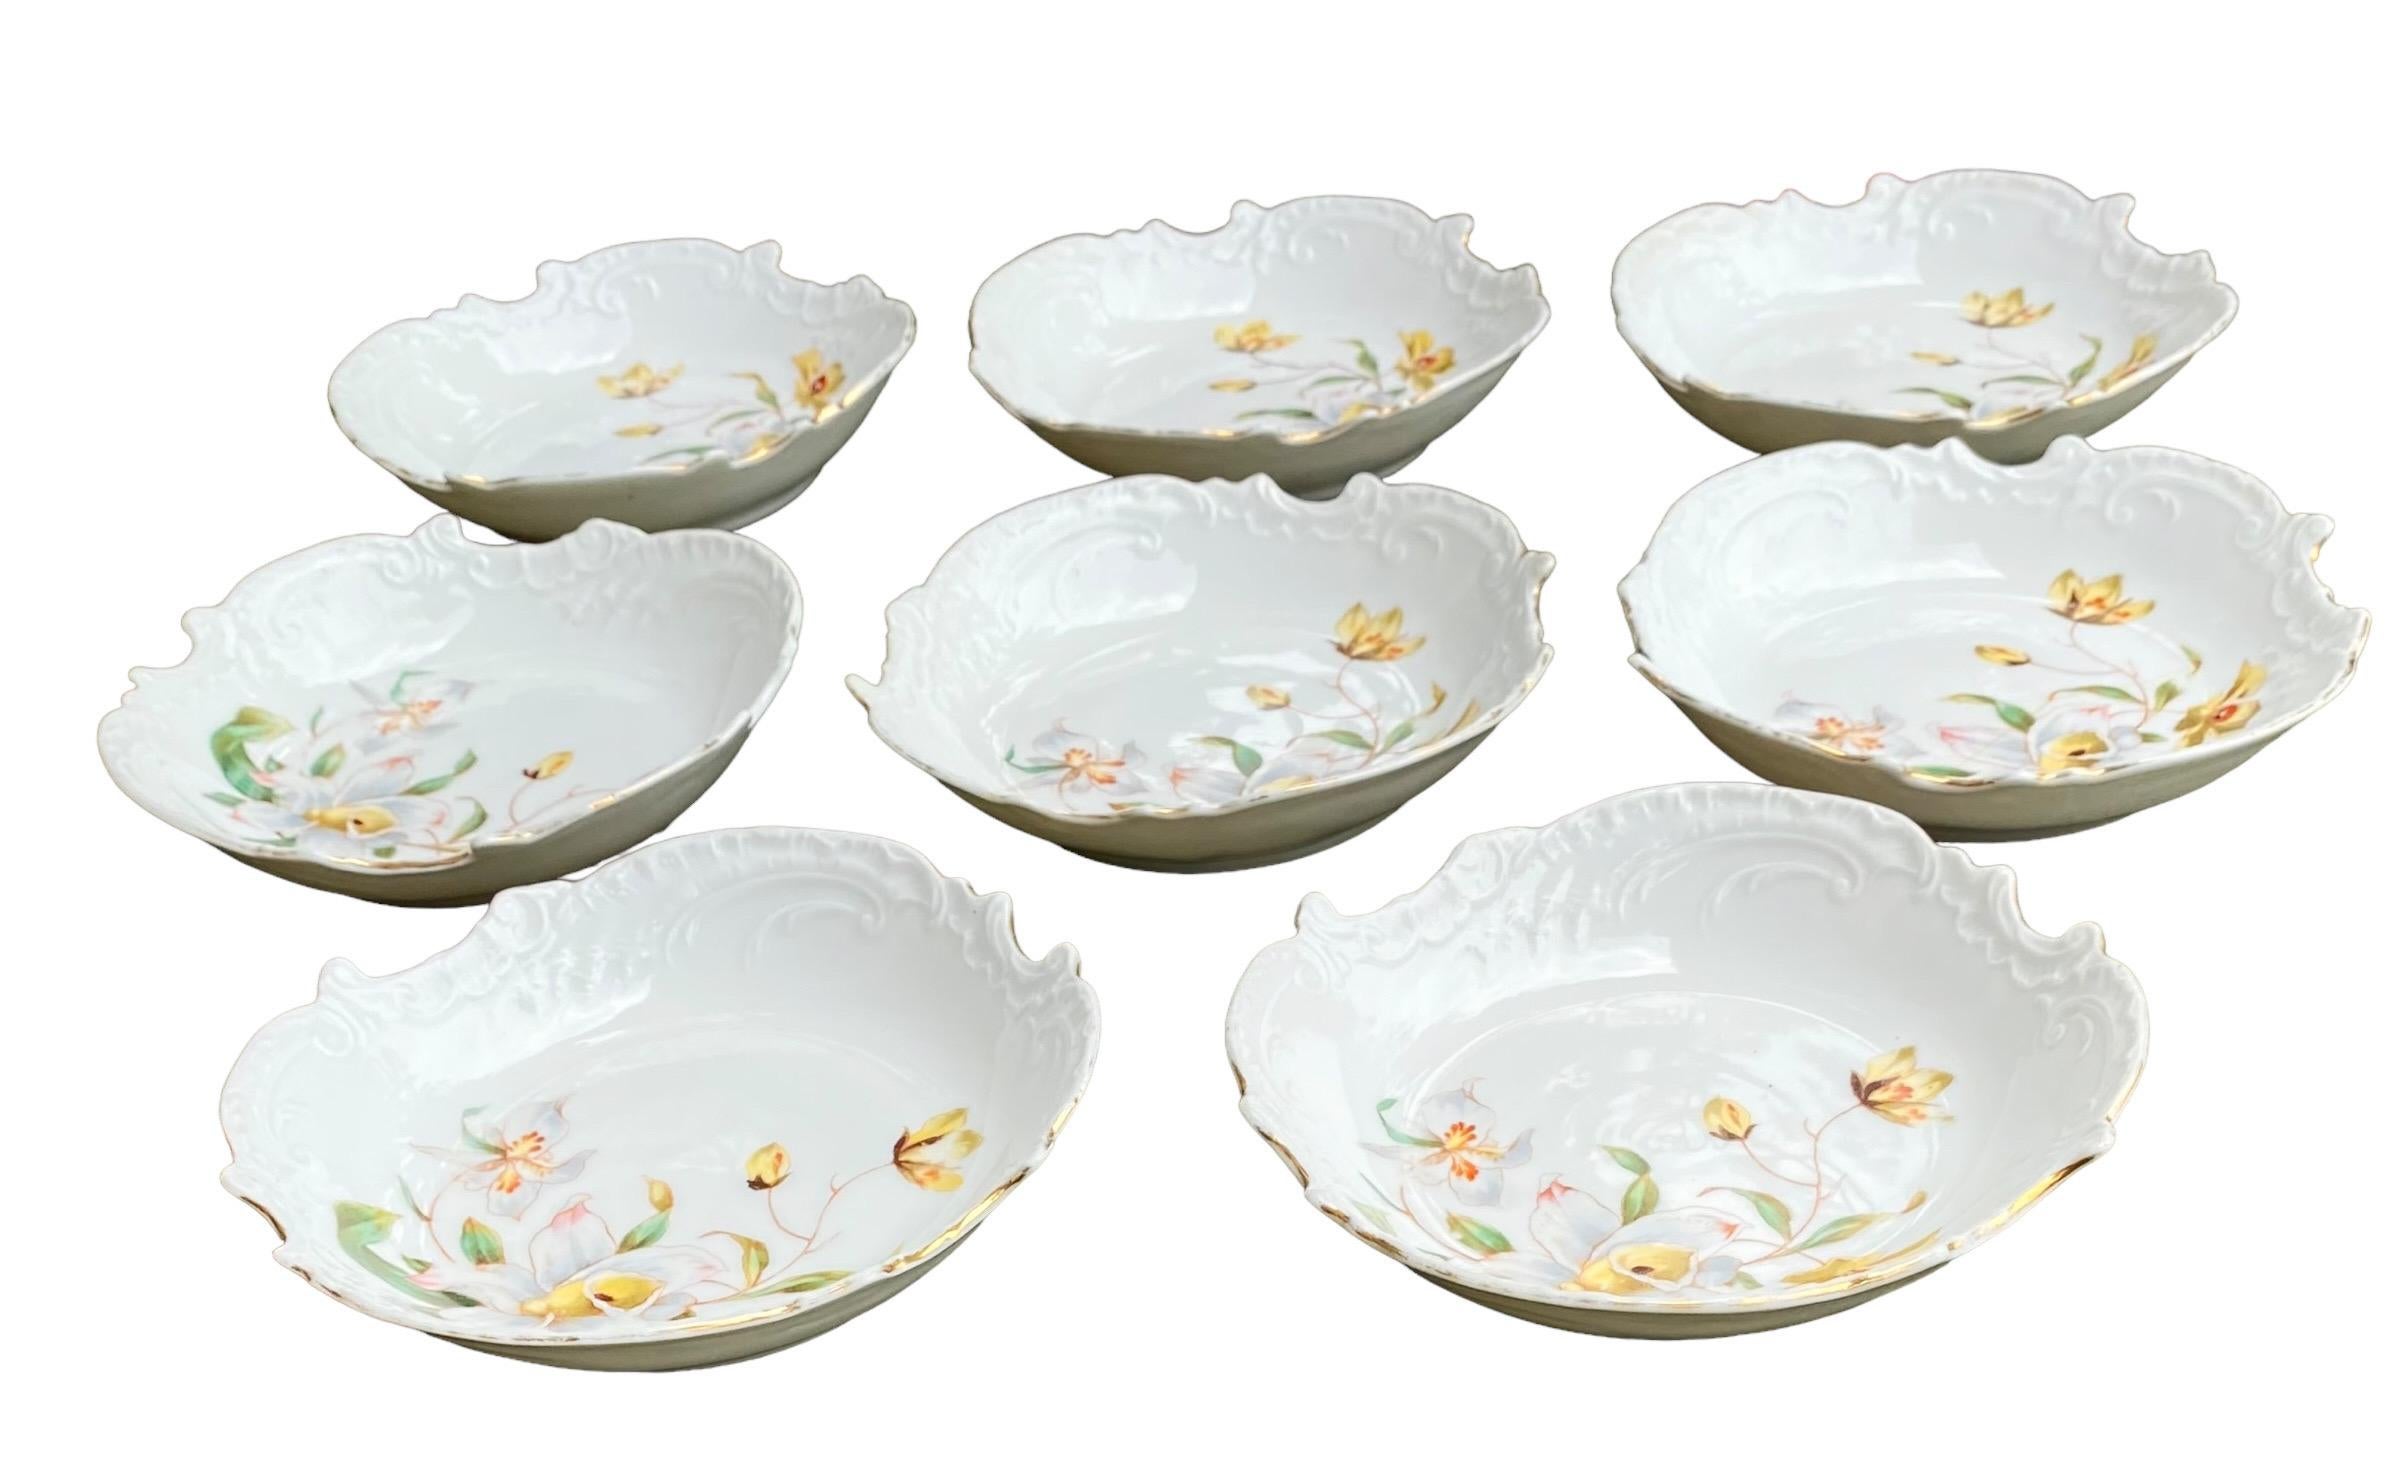 A set of eight delightful antique French porcelain bowls with embossed scrollwork and hand painted daffodils with vines and buds abound. Lovely to display in your vitrine or arranged in a wall assemblage in your dining room, living room, dressing